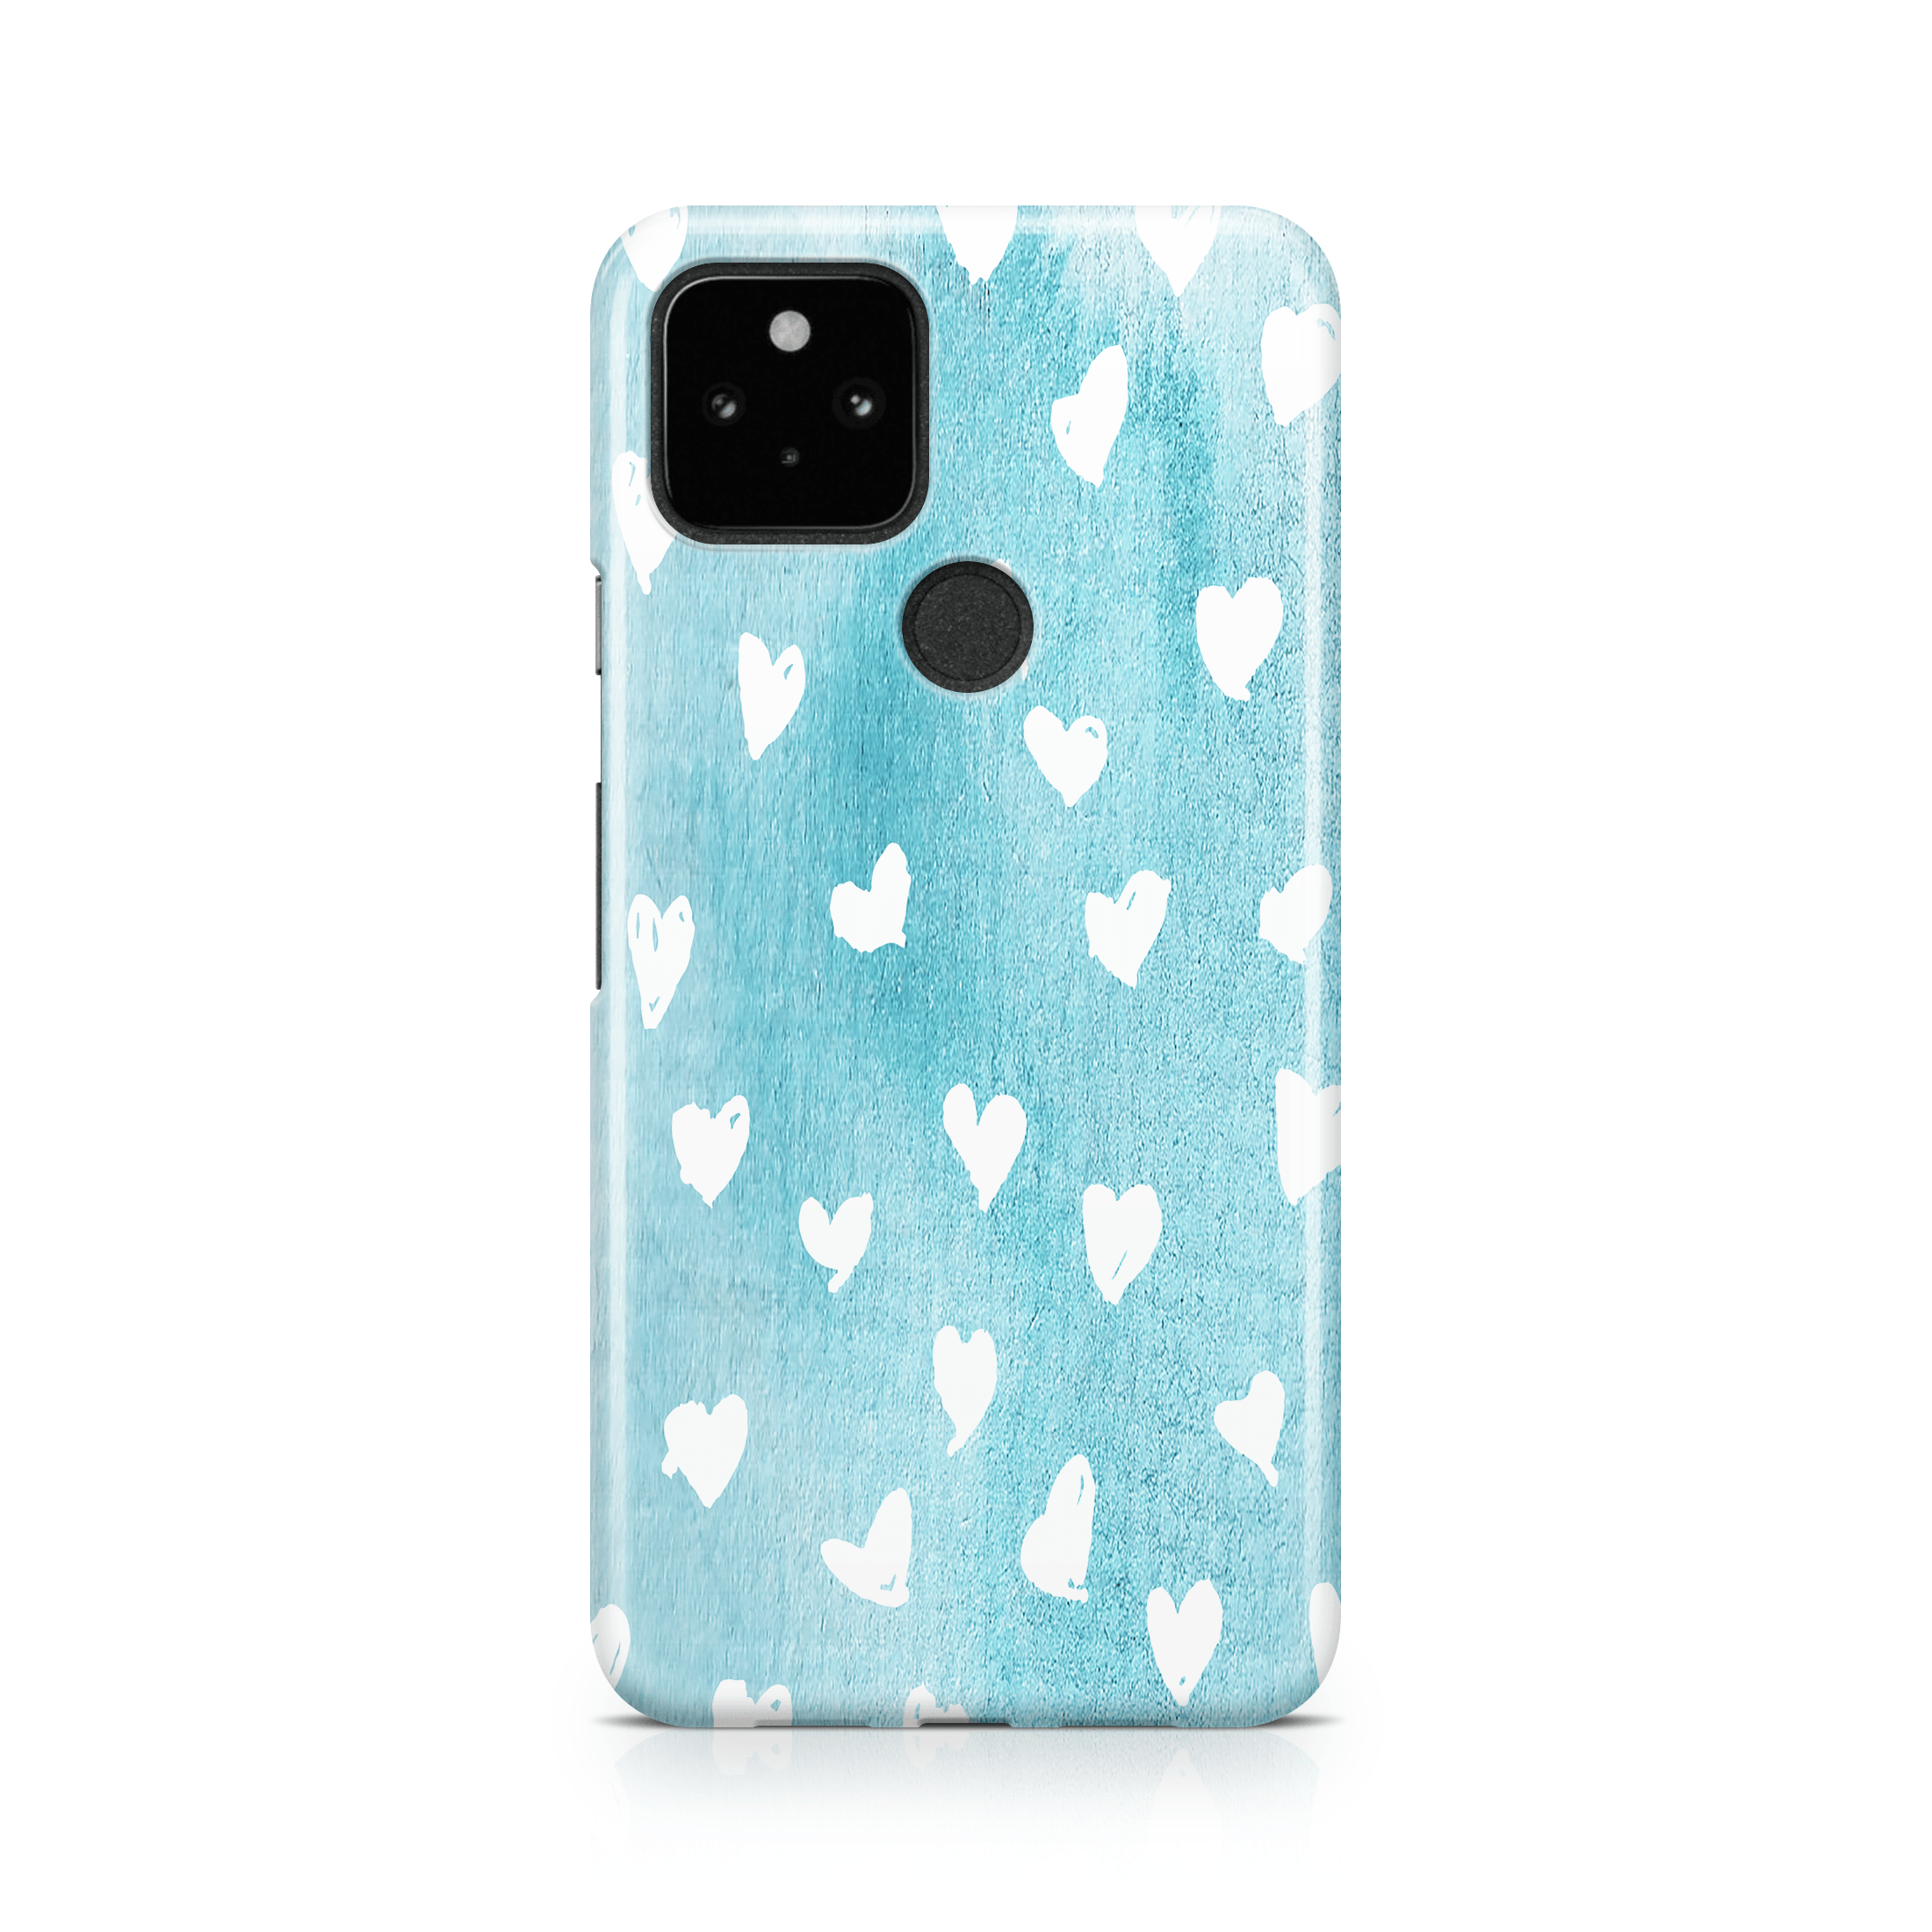 Blue Heart - Google phone case designs by CaseSwagger